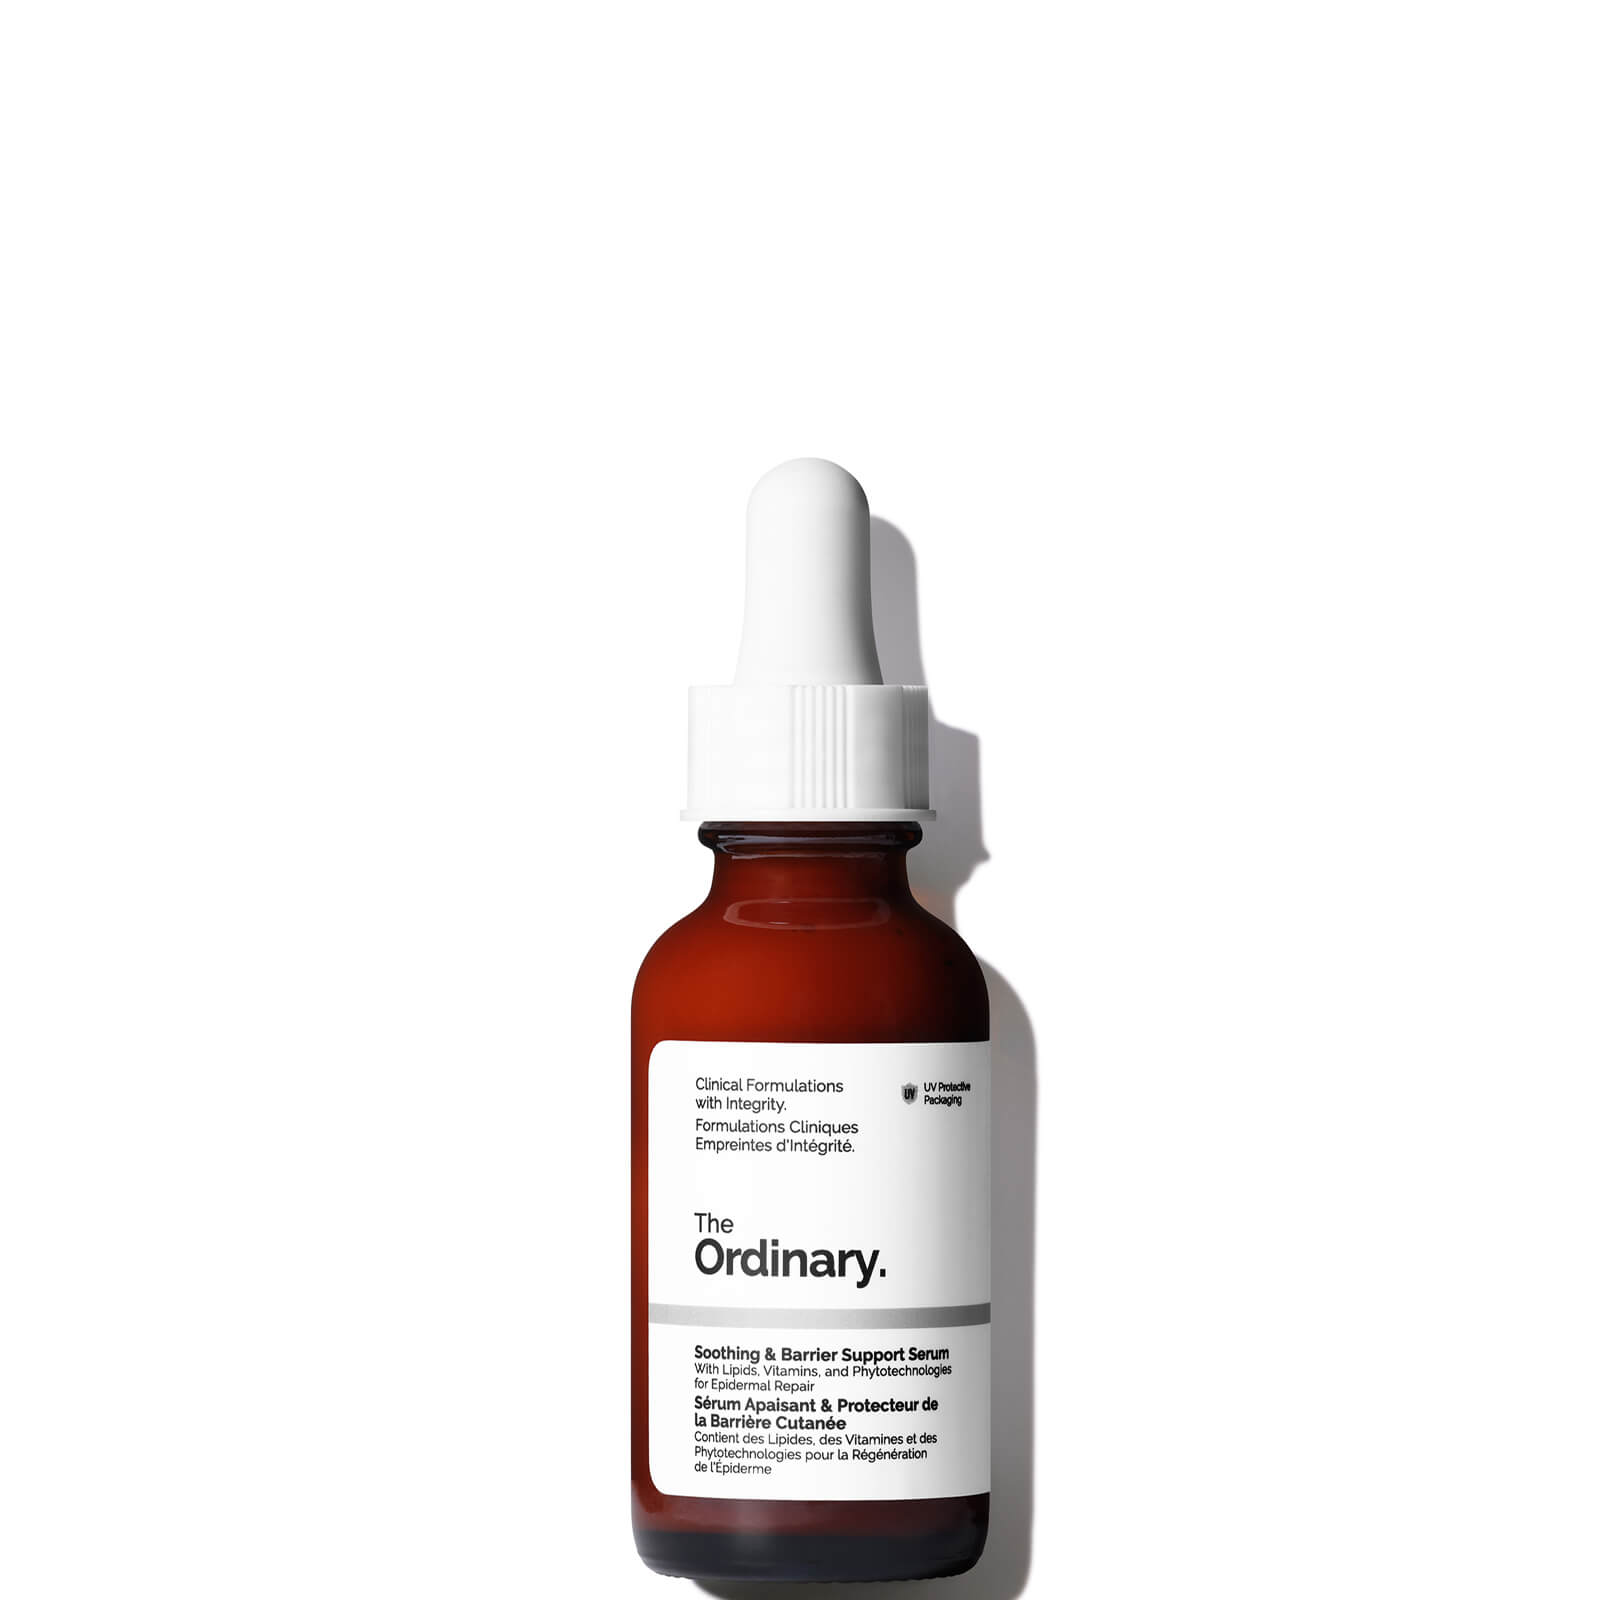 The Ordinary Soothing and Barrier Support Serum 30ml product